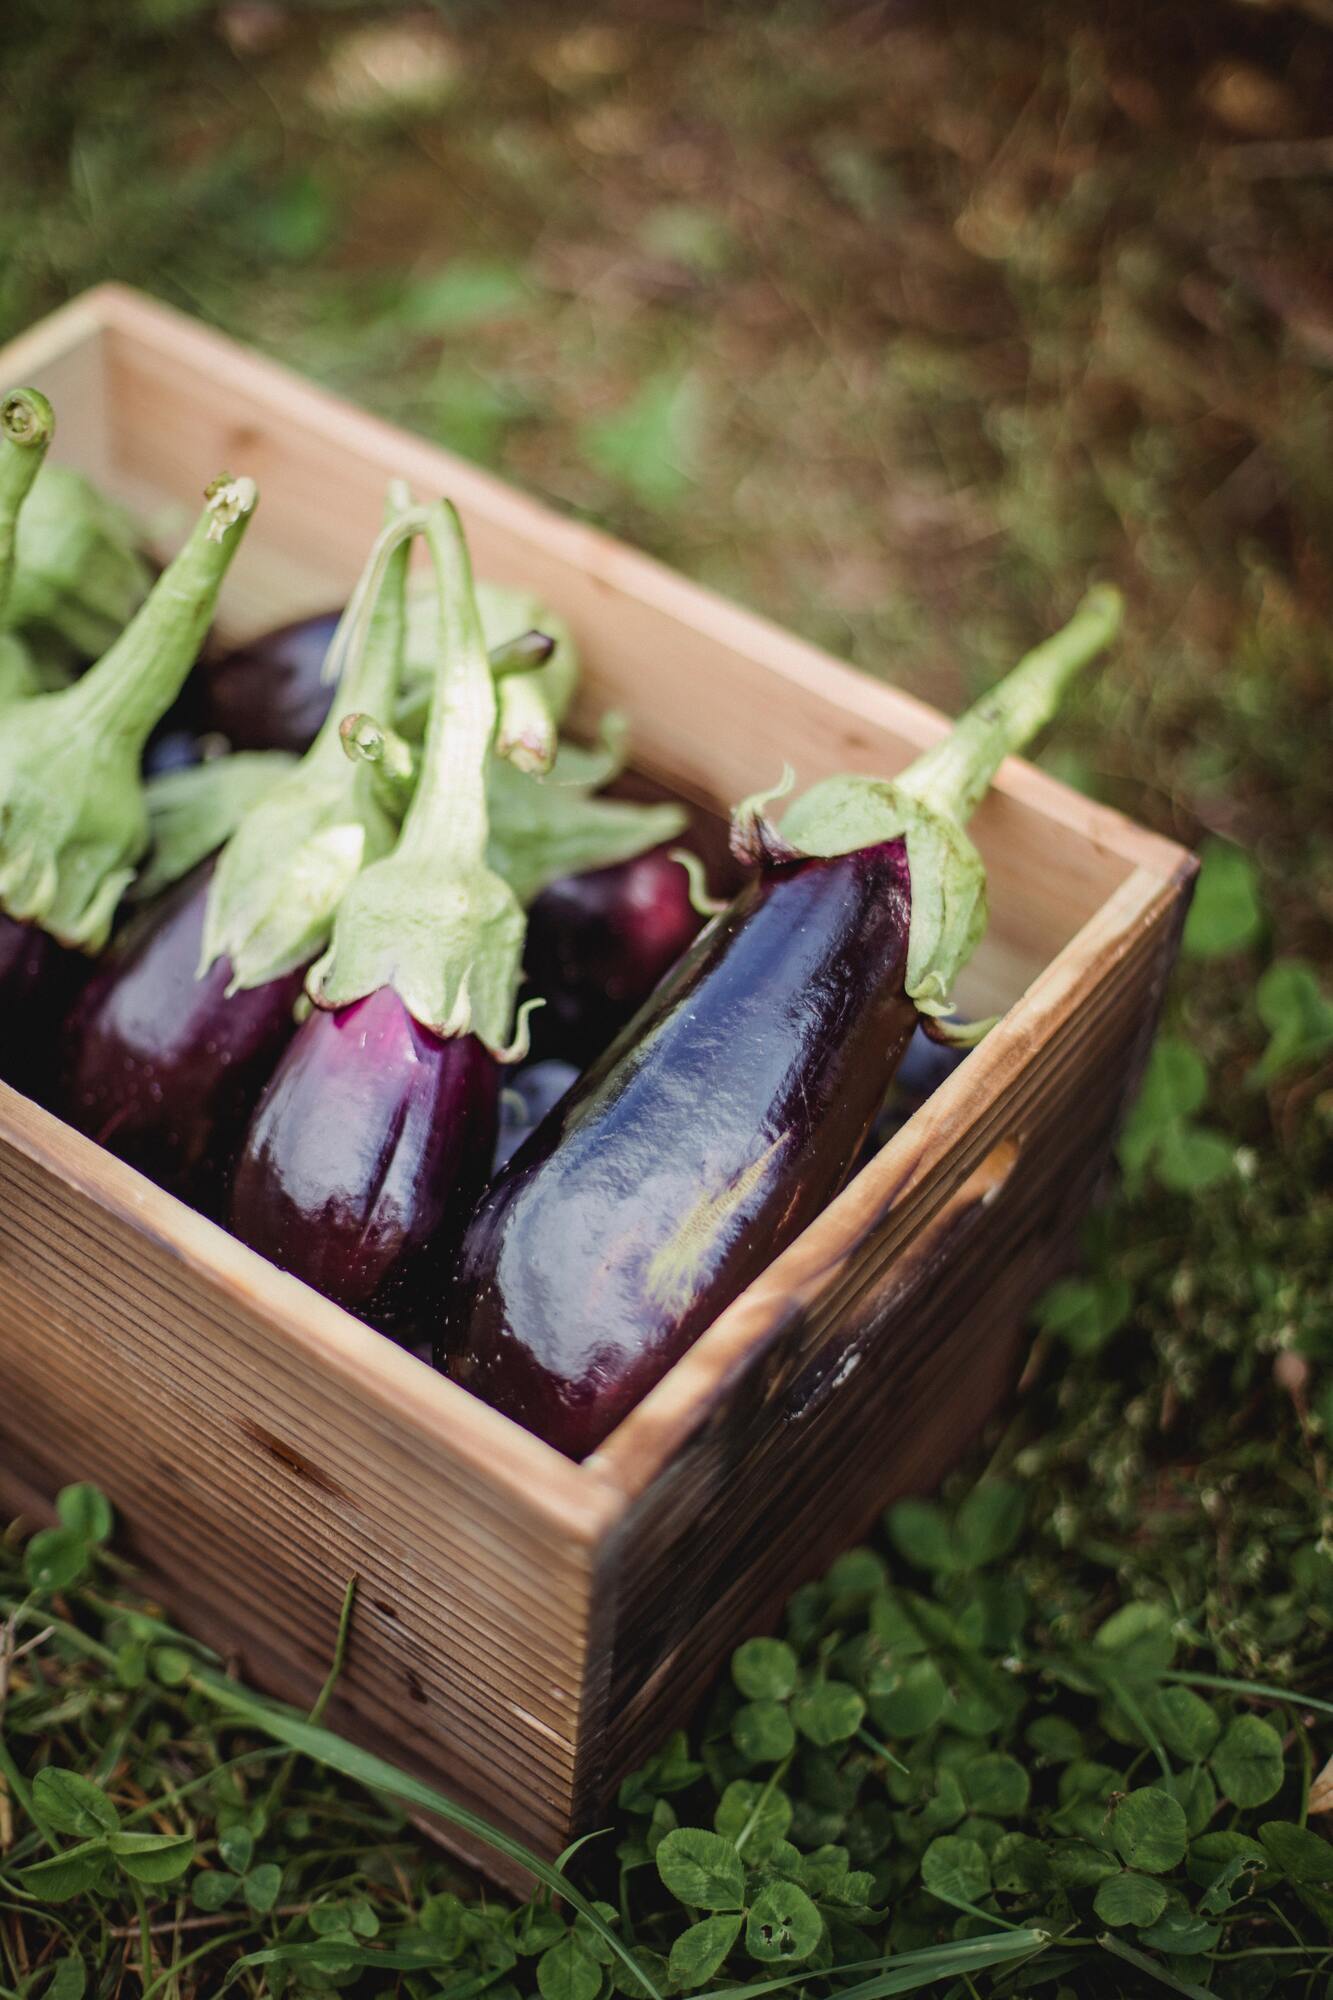 Eggplants for the dish